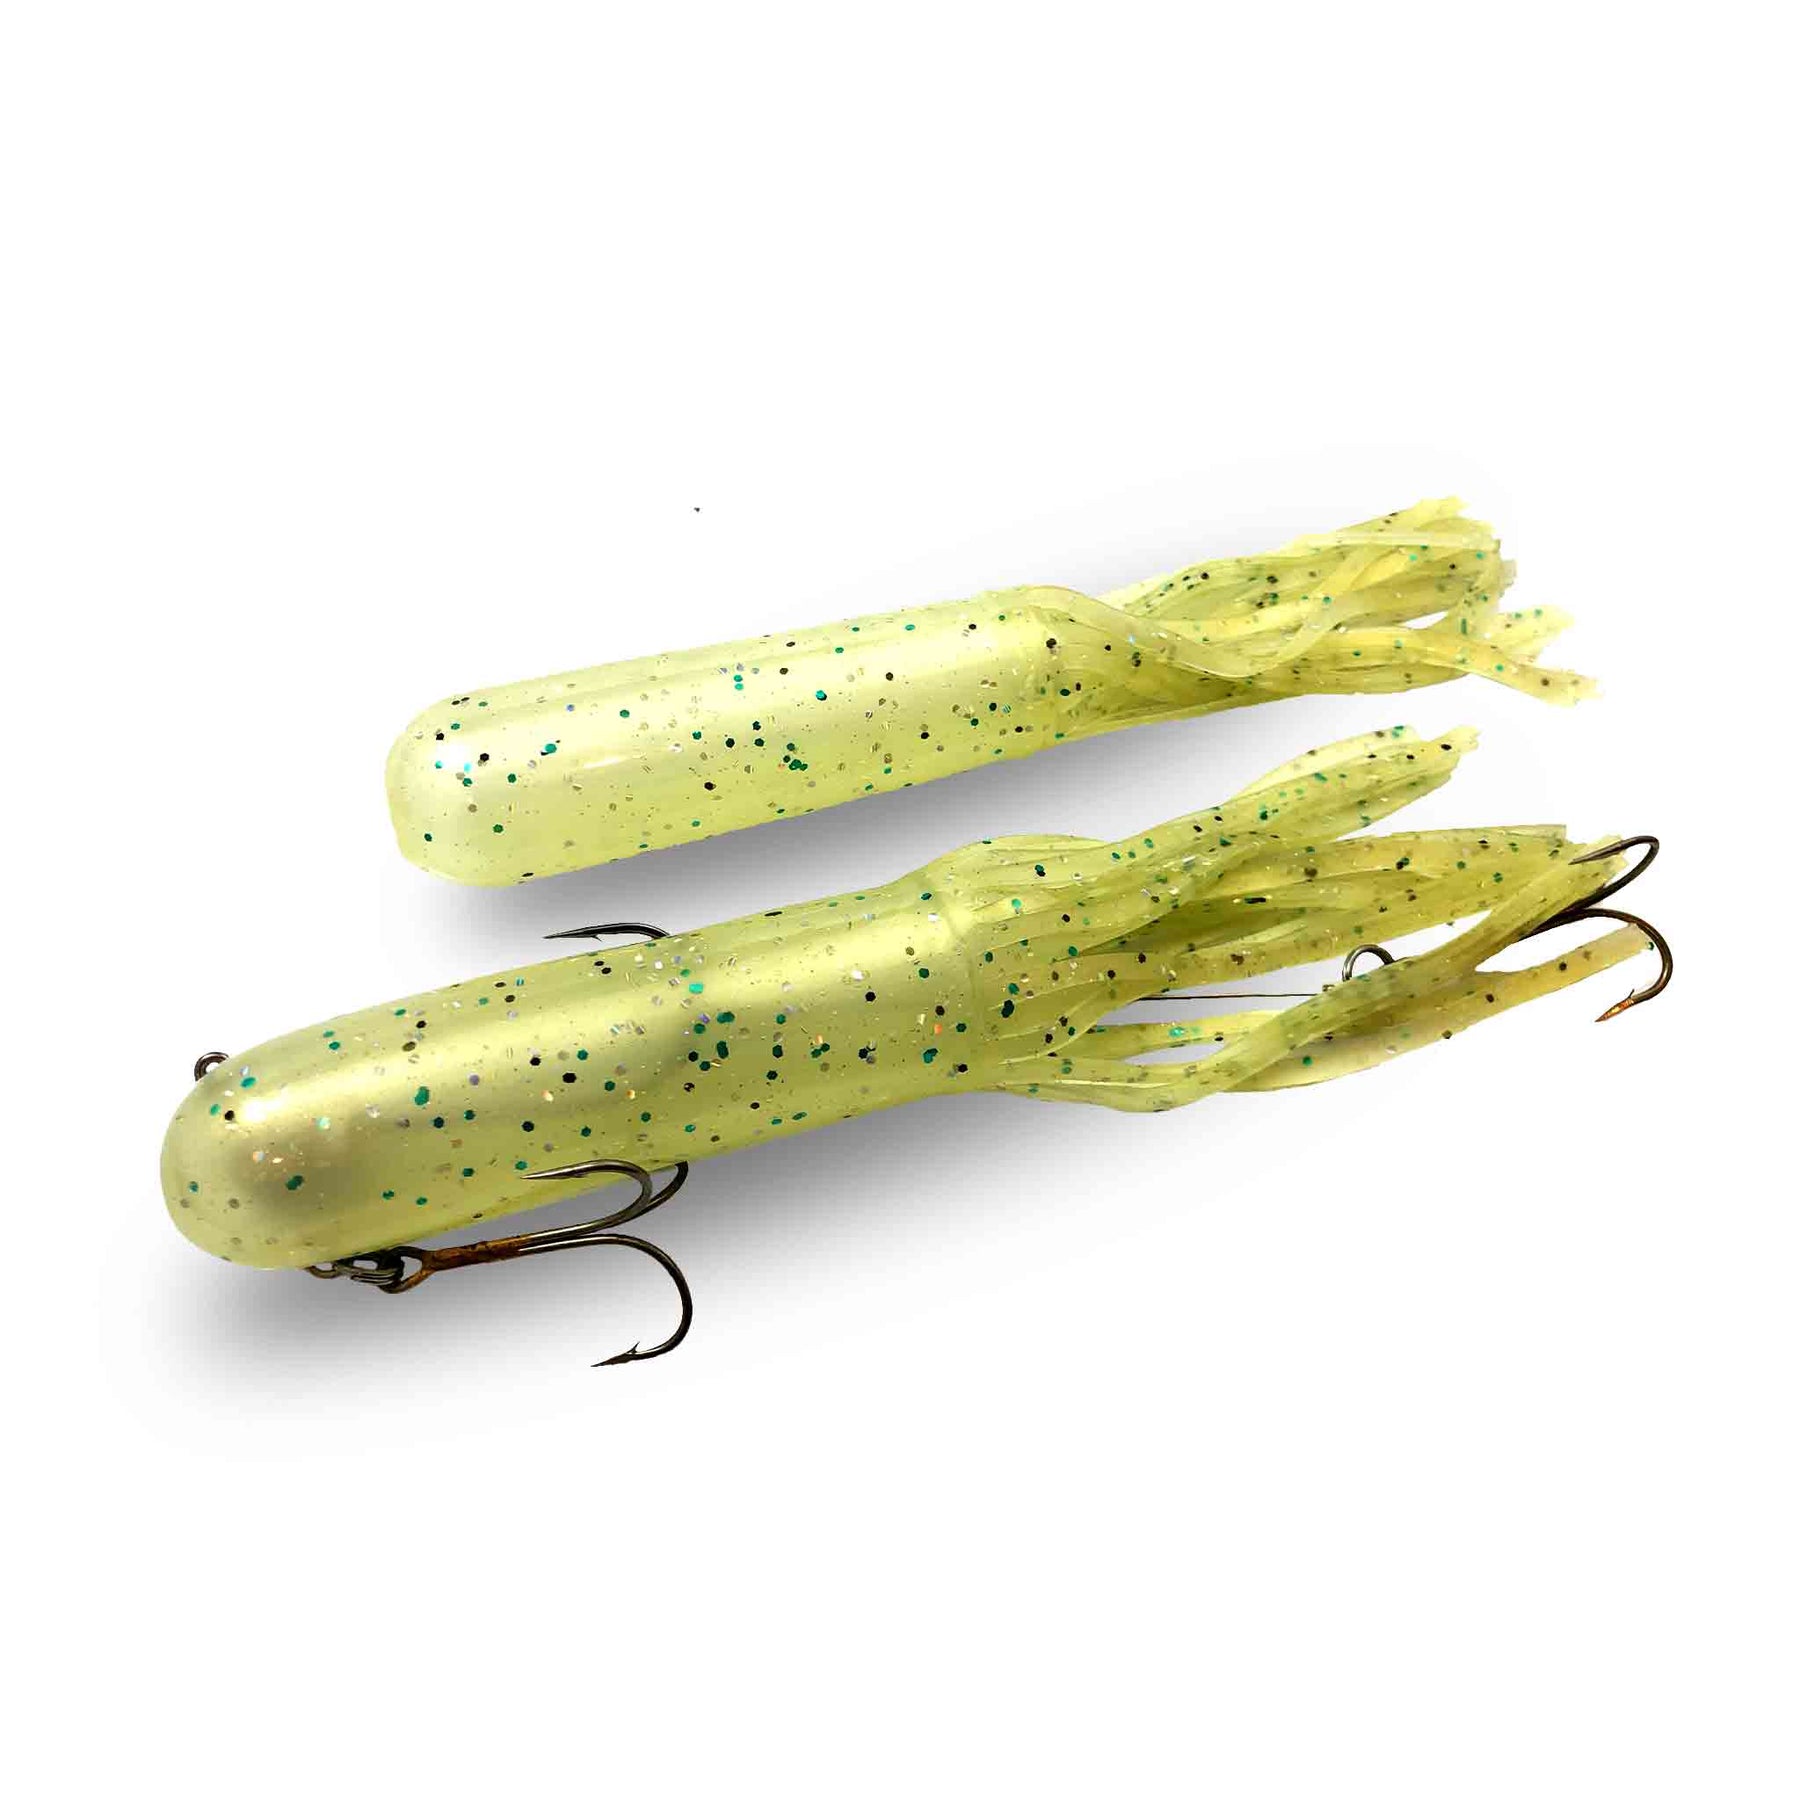 Red October 10" Monster Tubes - Mid-depth Baby Musky Rubber